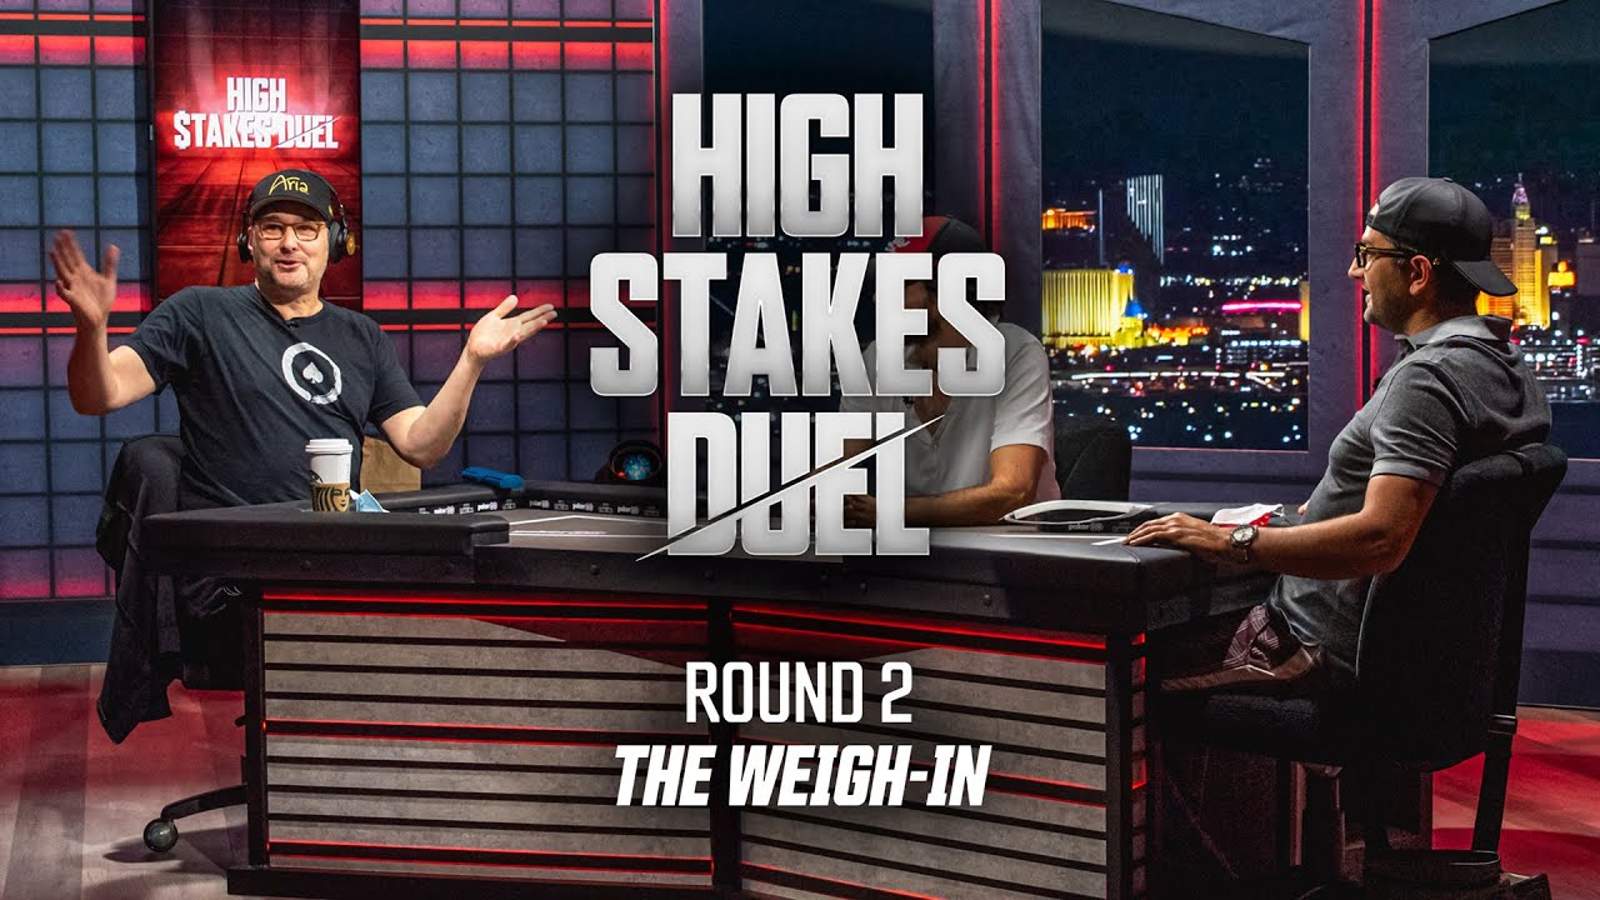 Watch The Weigh-In for Round 2 of High Stakes Duel Now